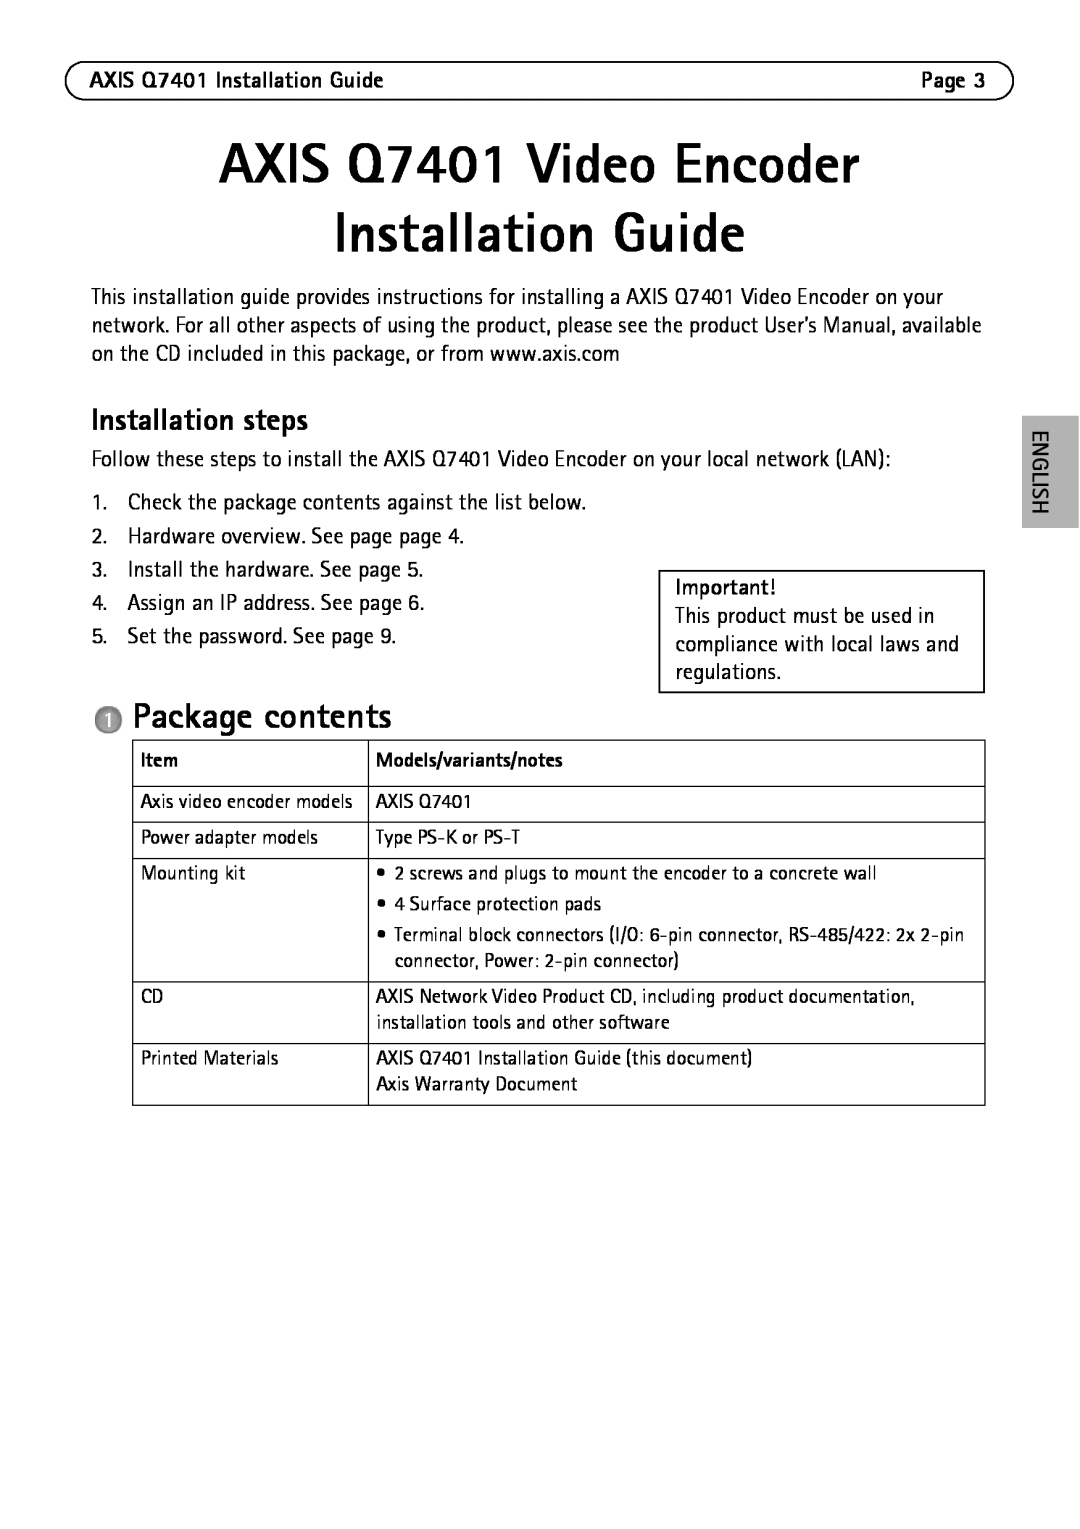 Axis Communications manual AXIS Q7401 Video Encoder Installation Guide, Package contents, Installation steps 